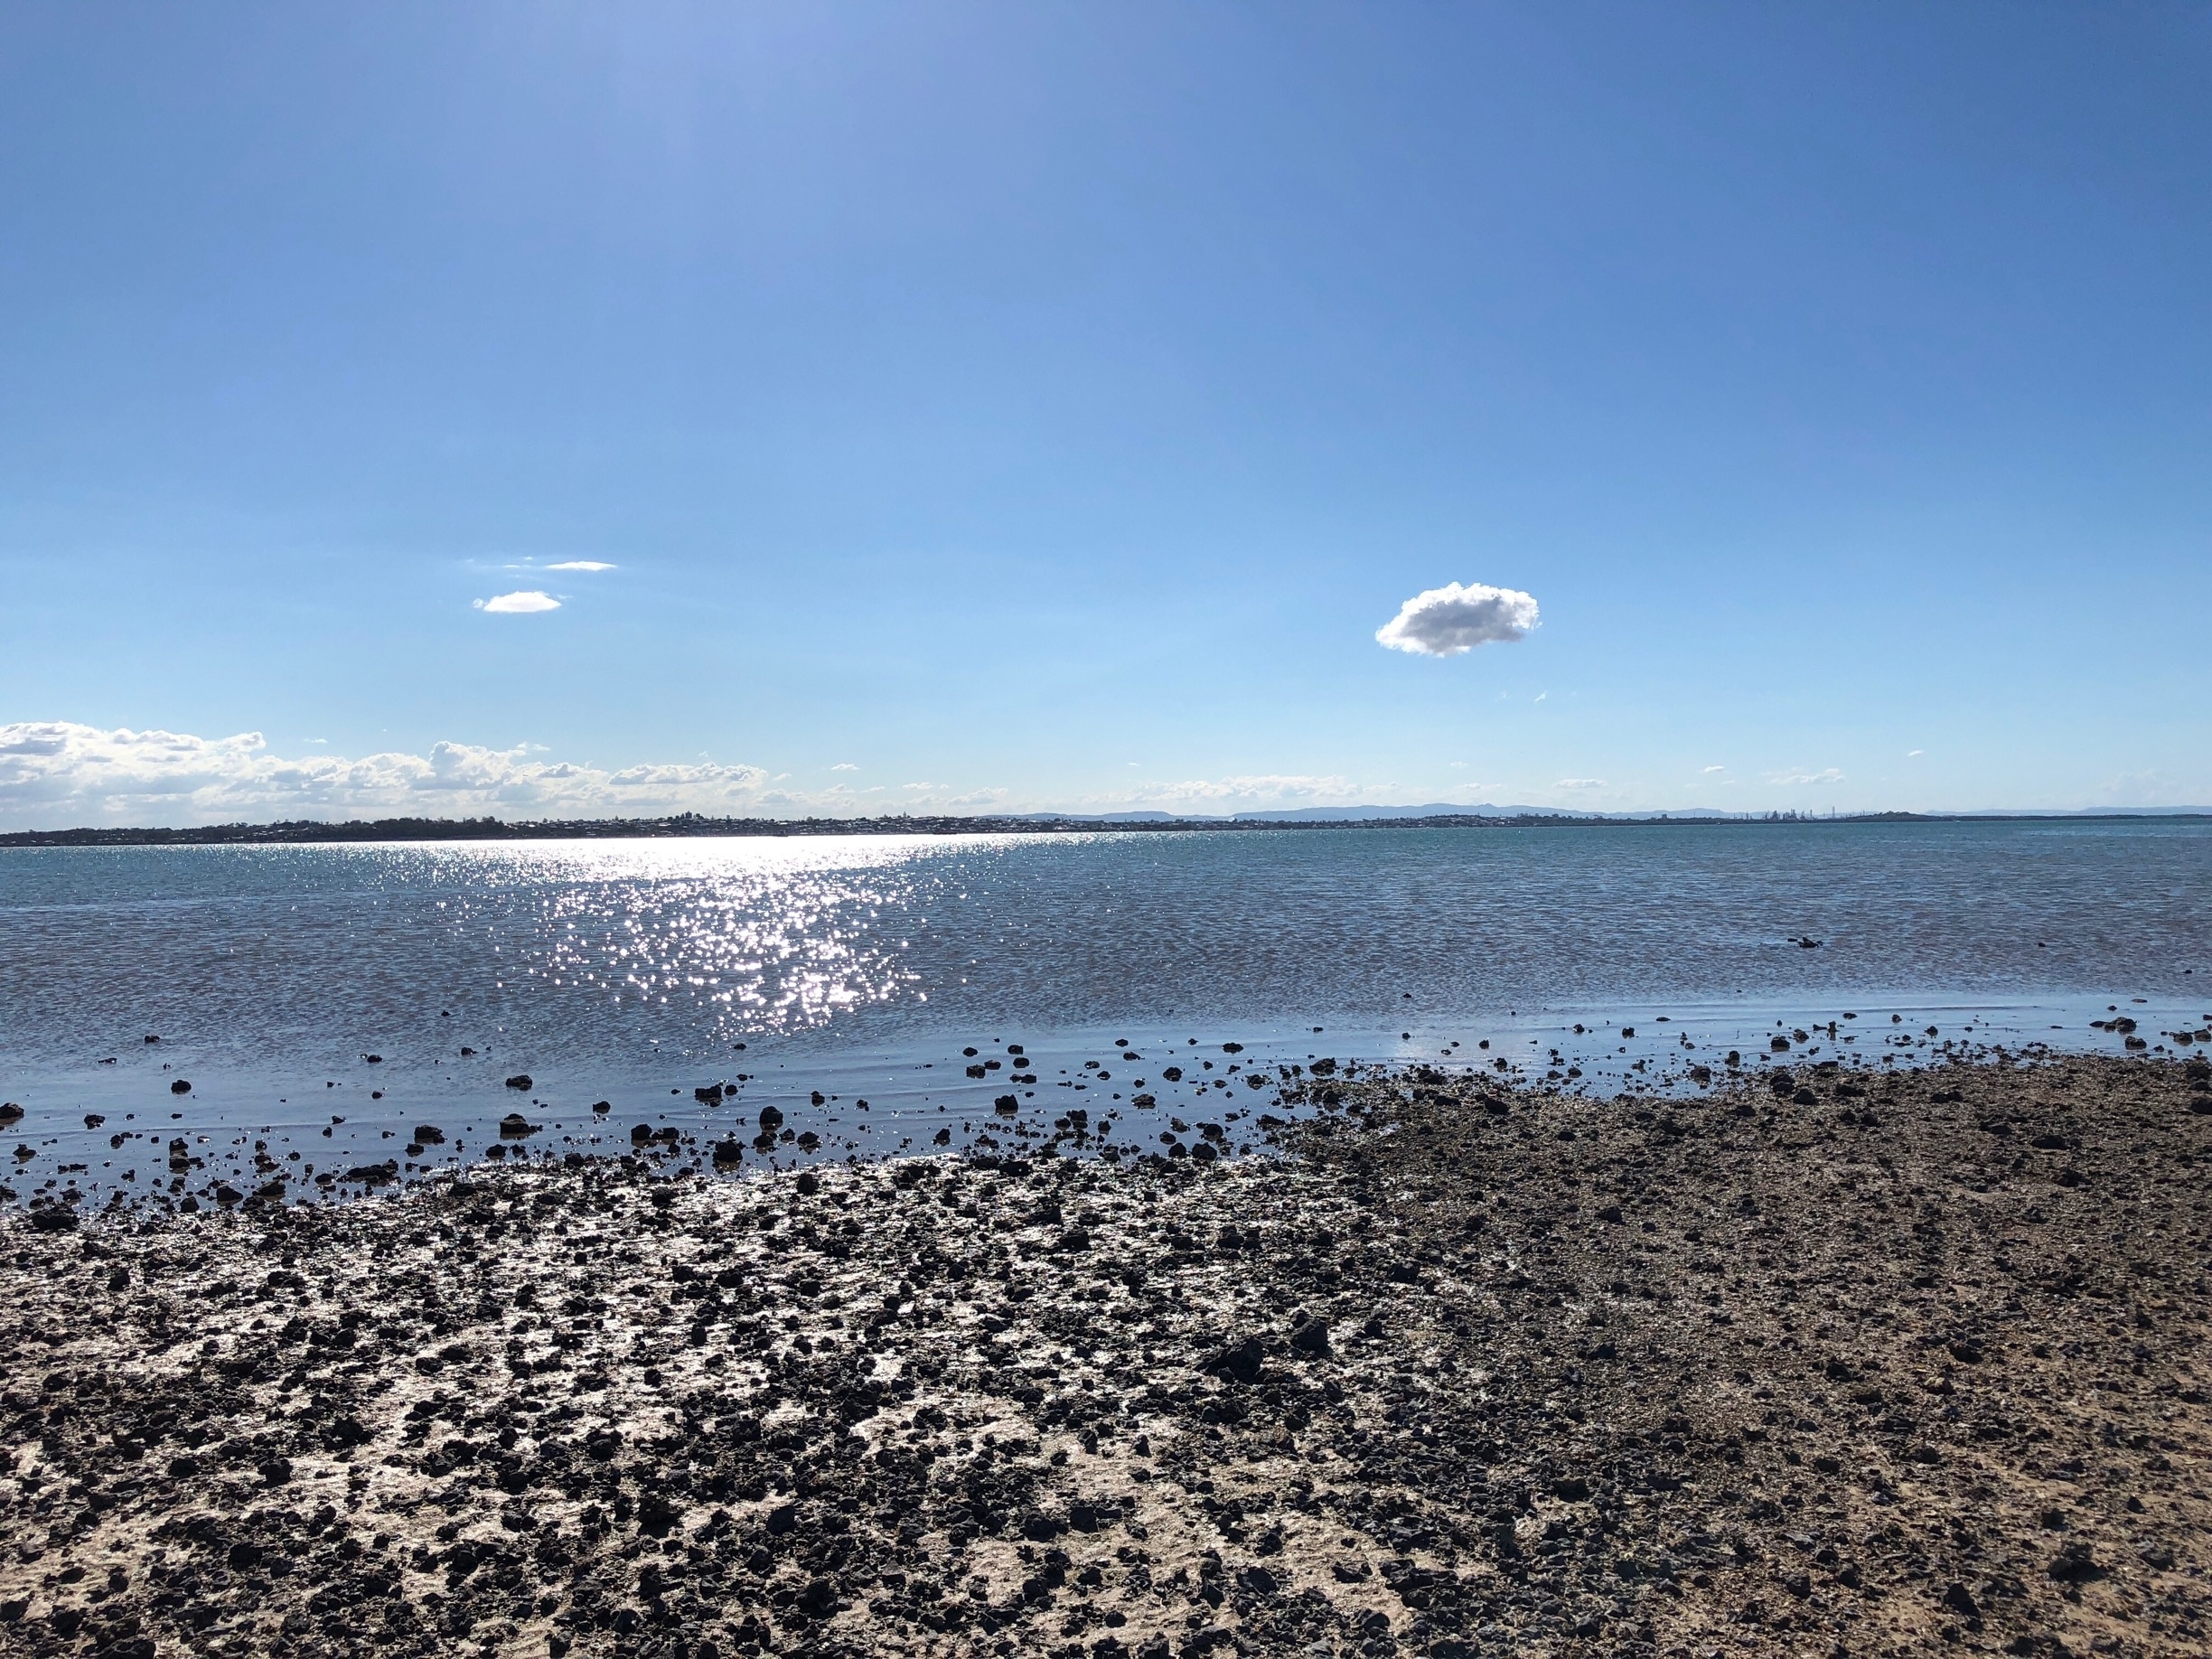 Little white Cloud.
Wellington Point Brisbane.
At low tide you can walk to a small island called King Island. When the tide comes in you can cross in waist deep water.